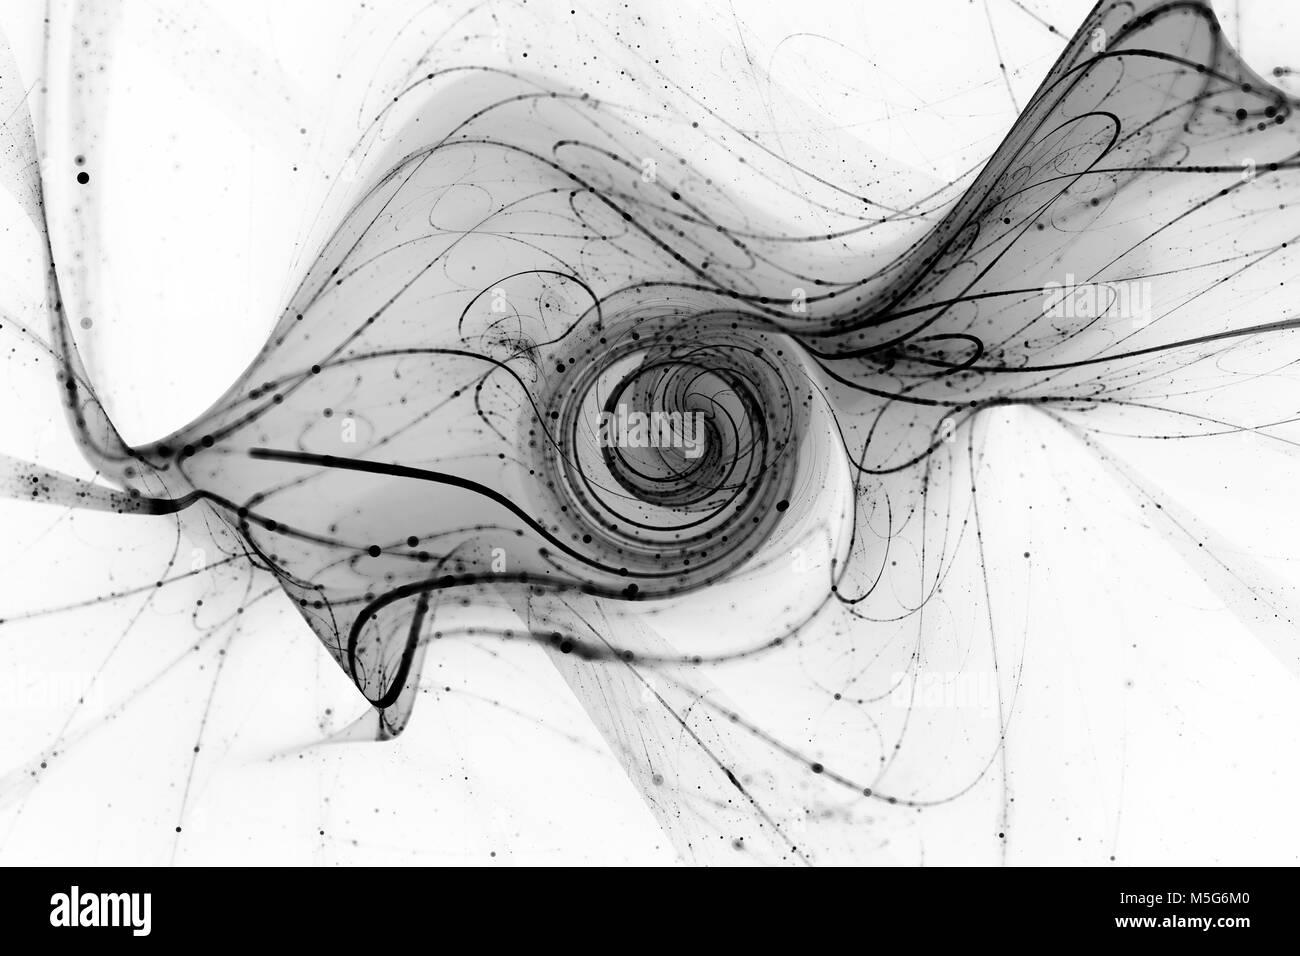 Futuristic spiral with particles and trajectories, black and white inverted, computer generated abstract texture for overlay or screen effect, 3D rend Stock Photo